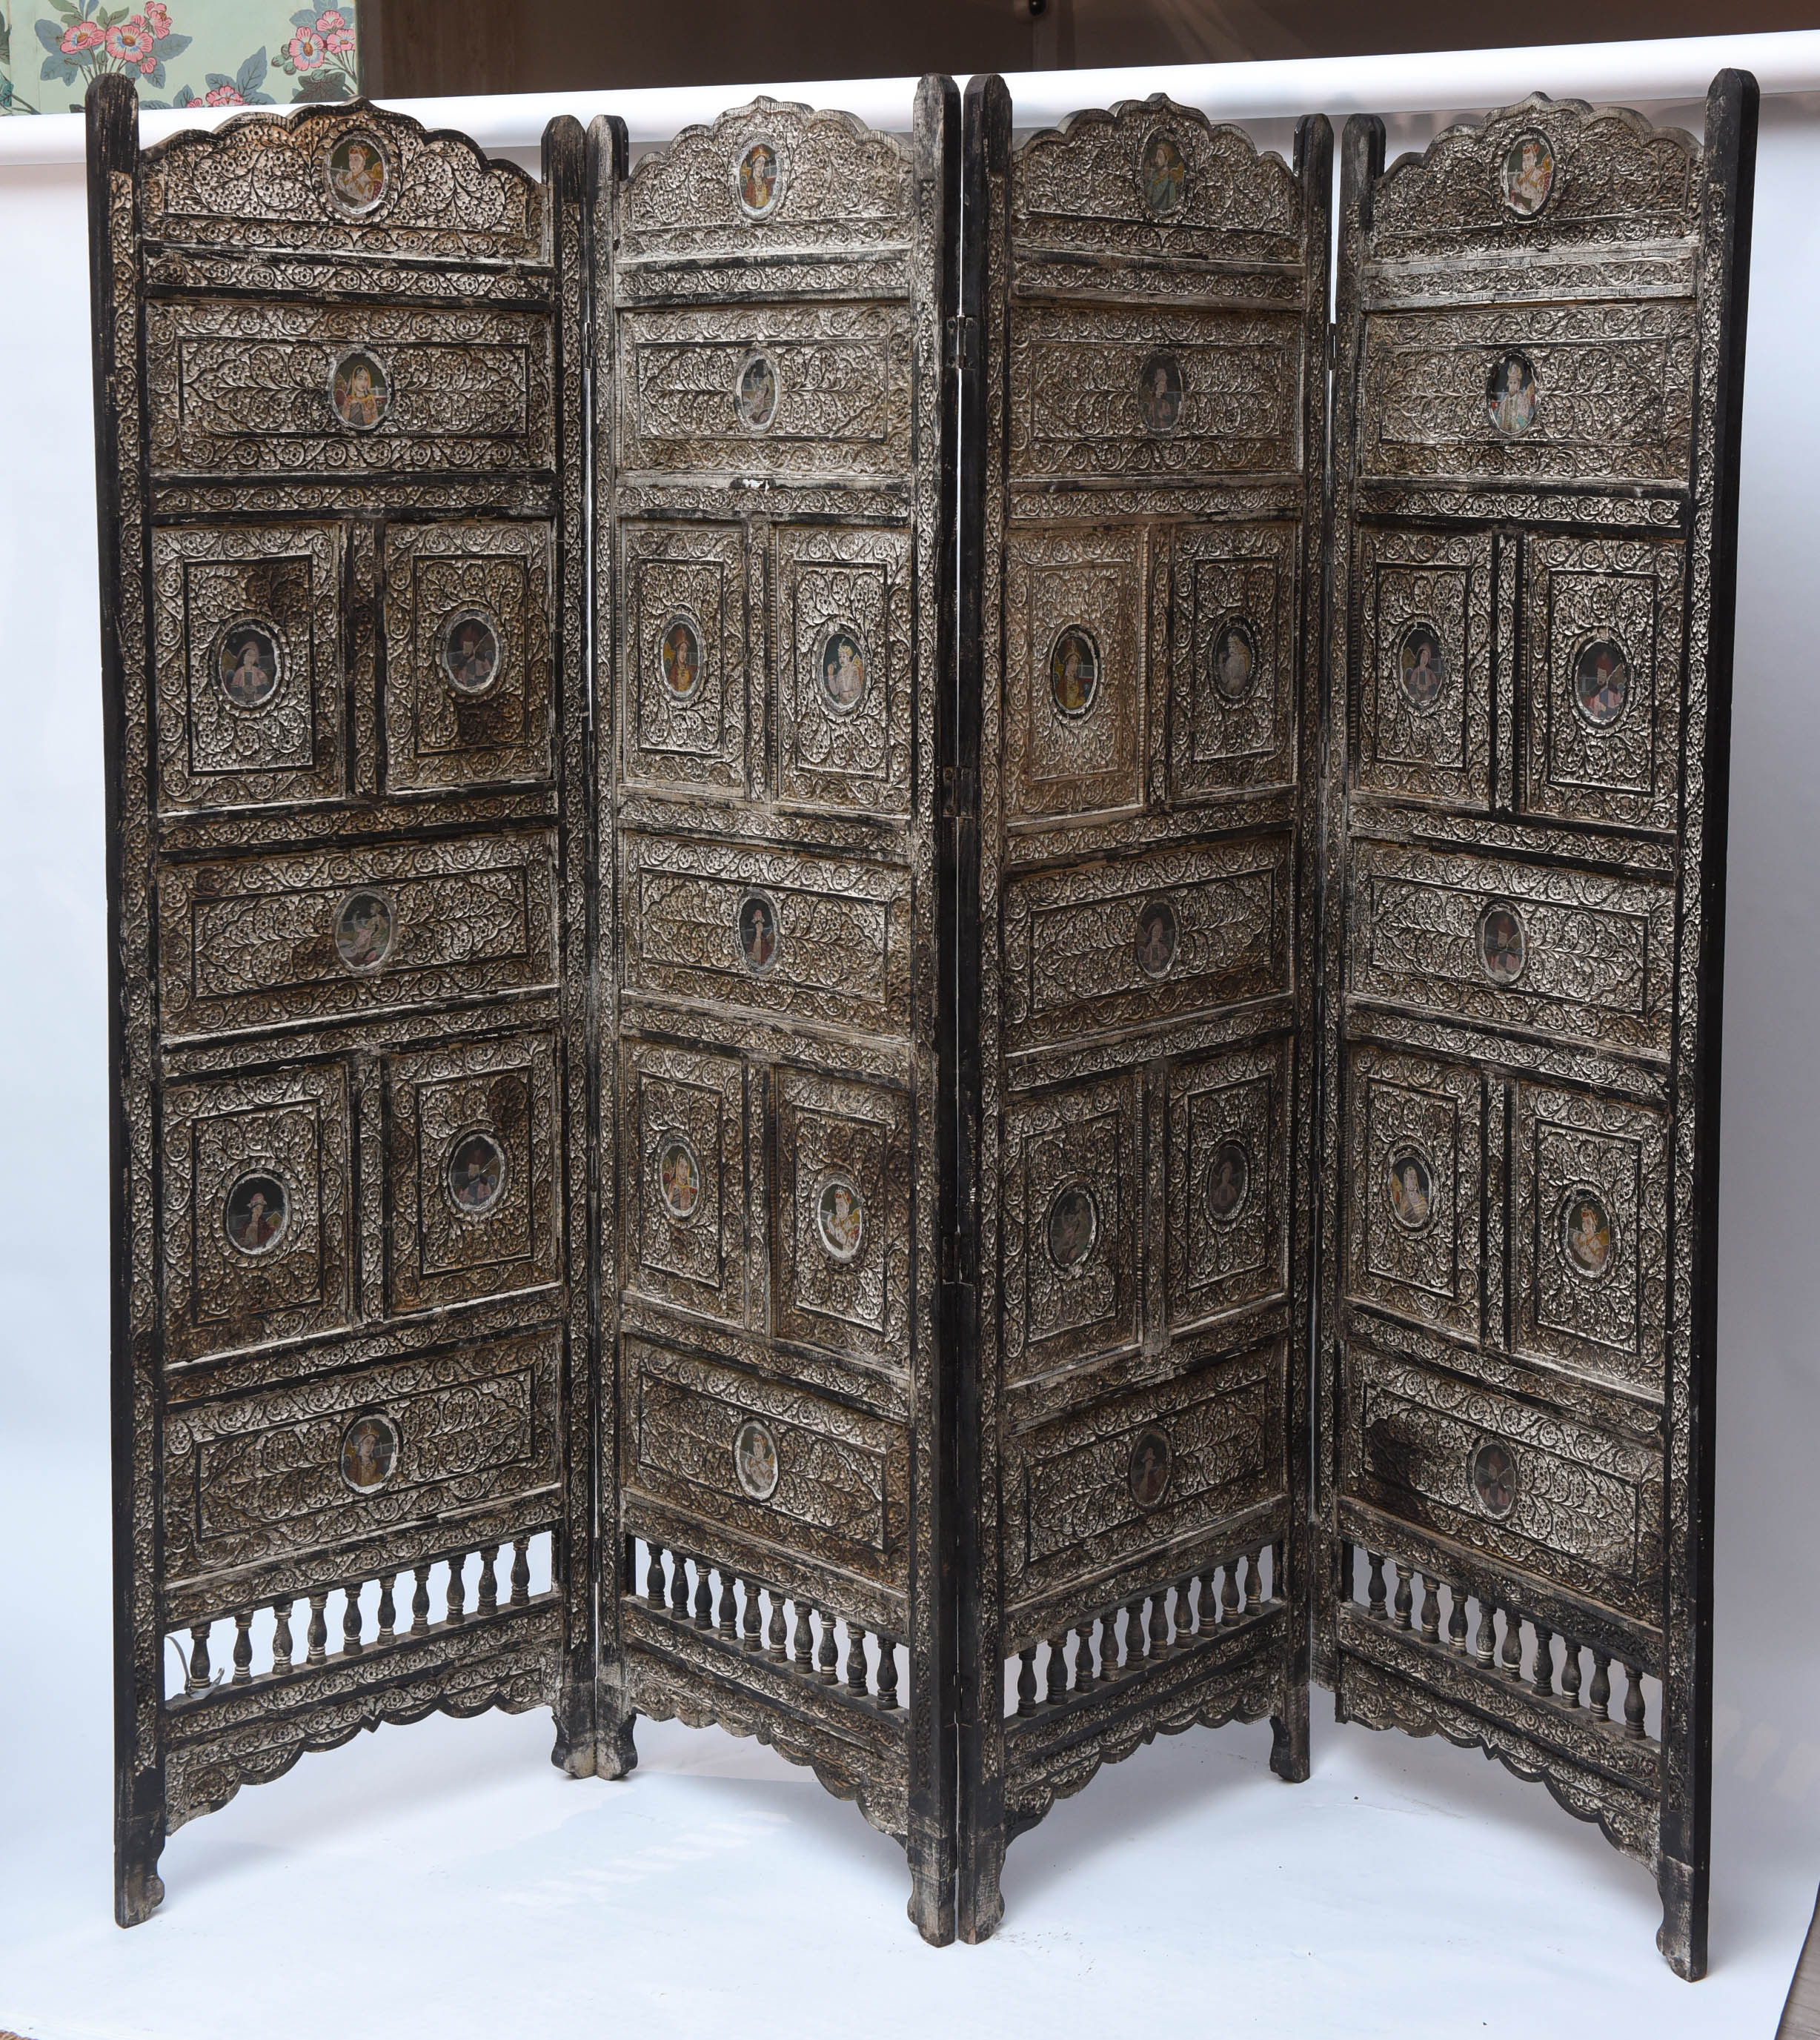 Outstanding Four-Panel Indian Mughal Inspired Portrait Screen